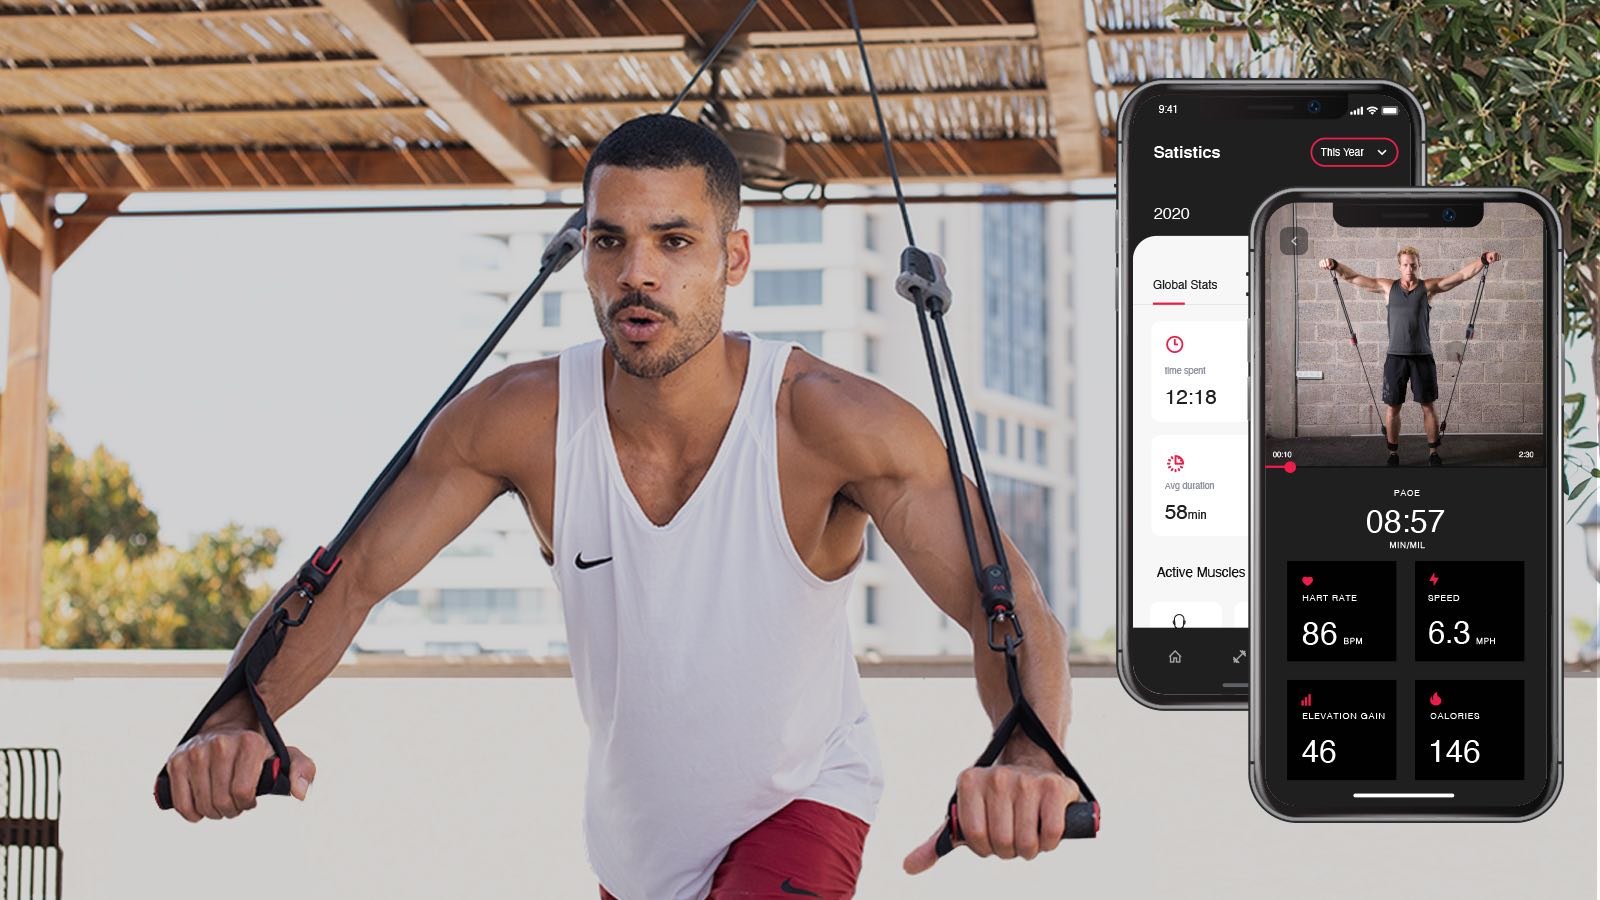 HYGEAR Gear 1 workout app and smart resistance band system tracks all your fitness stats